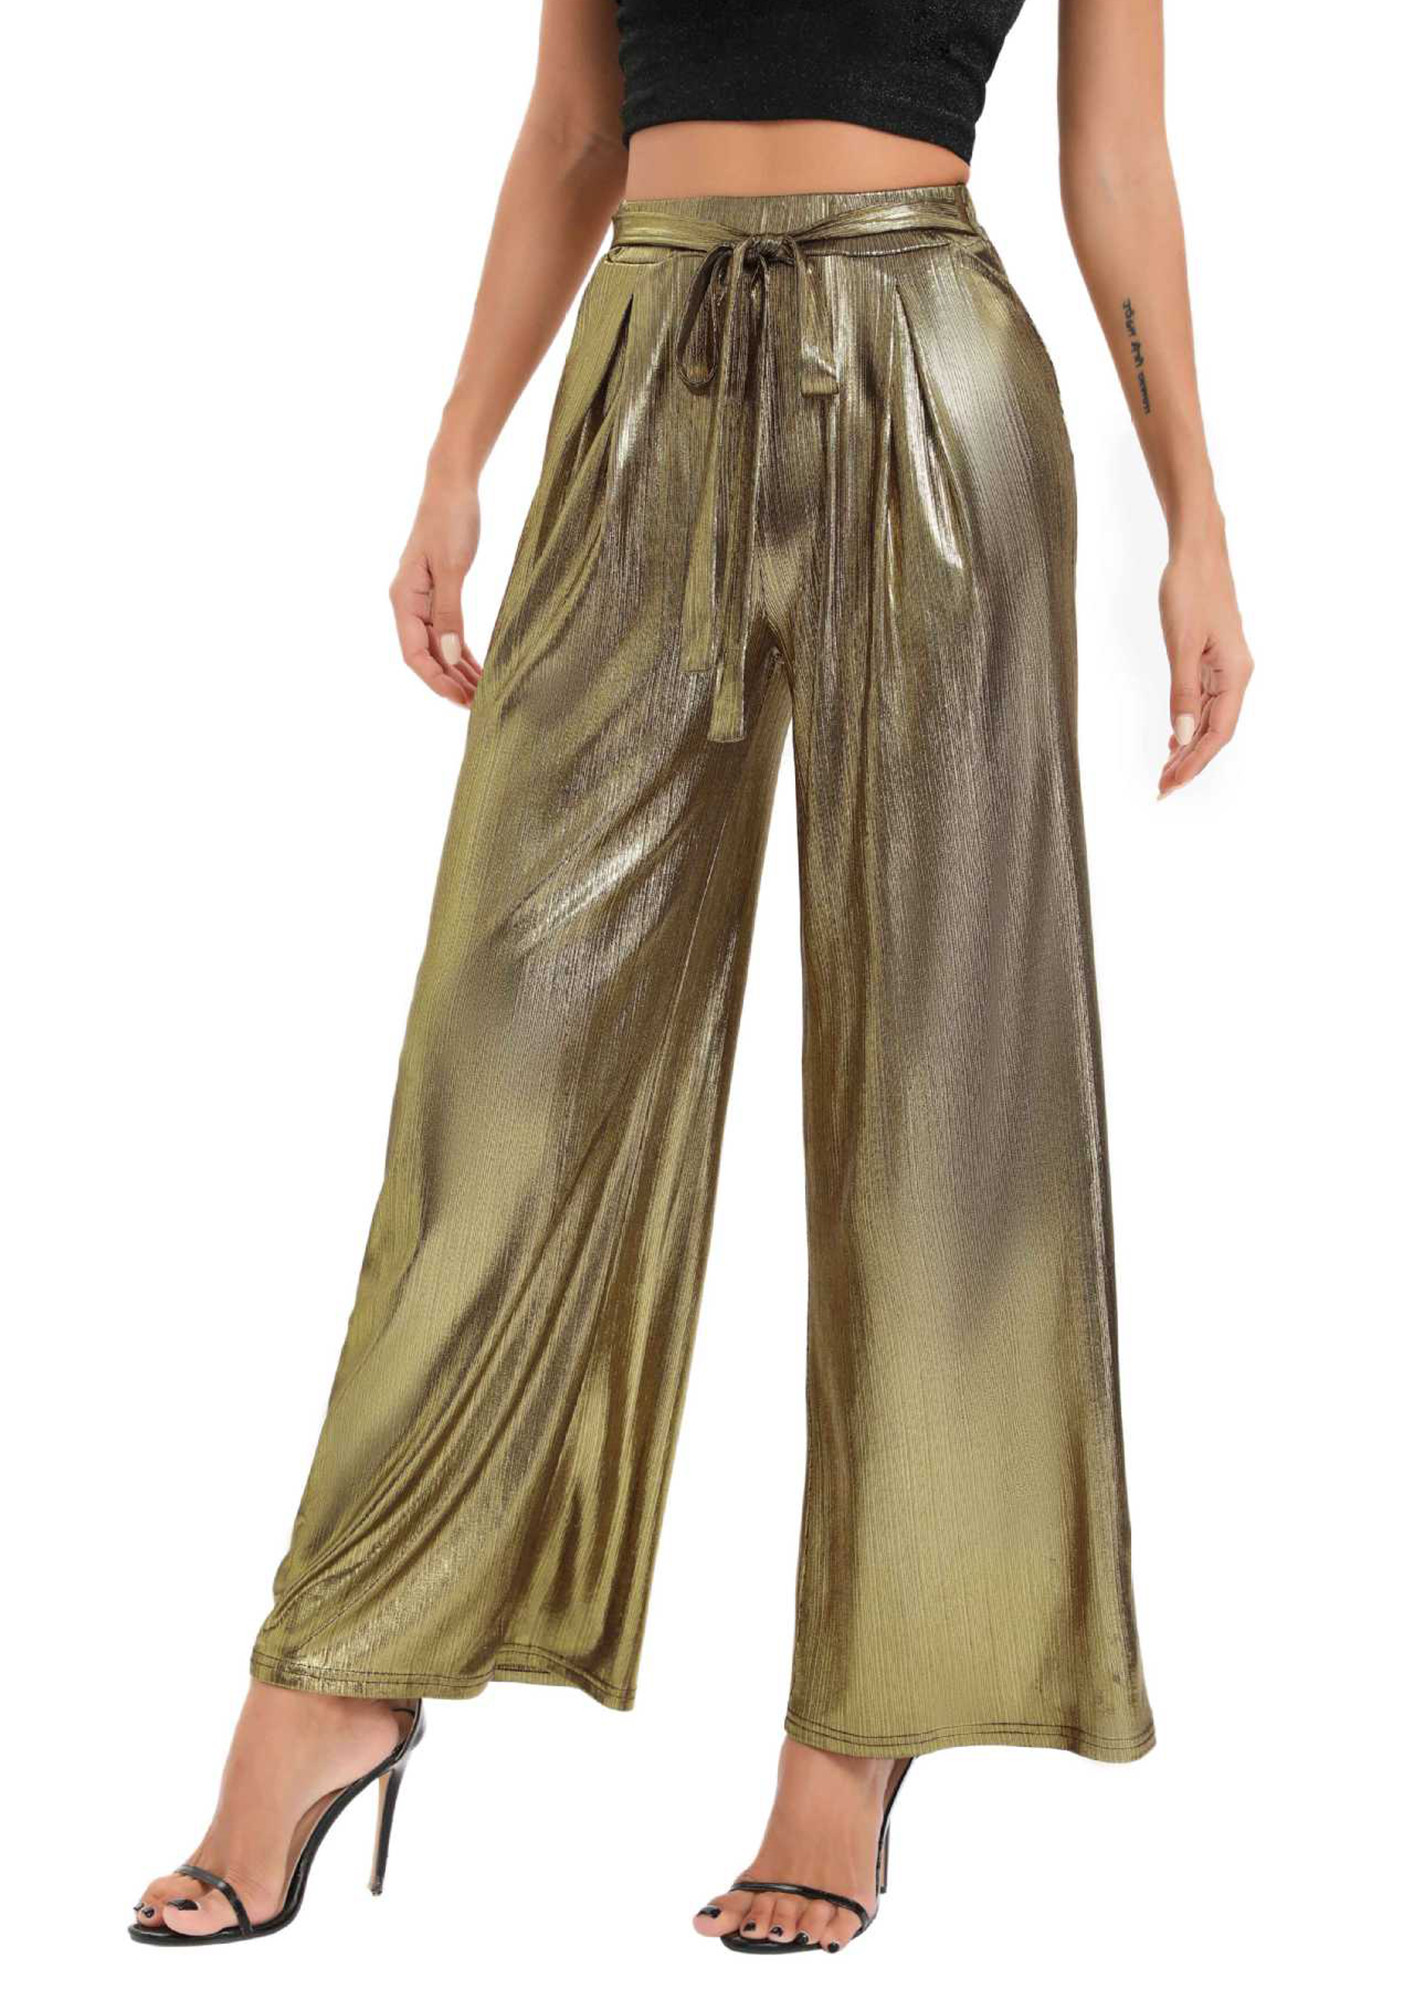 Gold Trousers  Buy Gold Trousers online in India